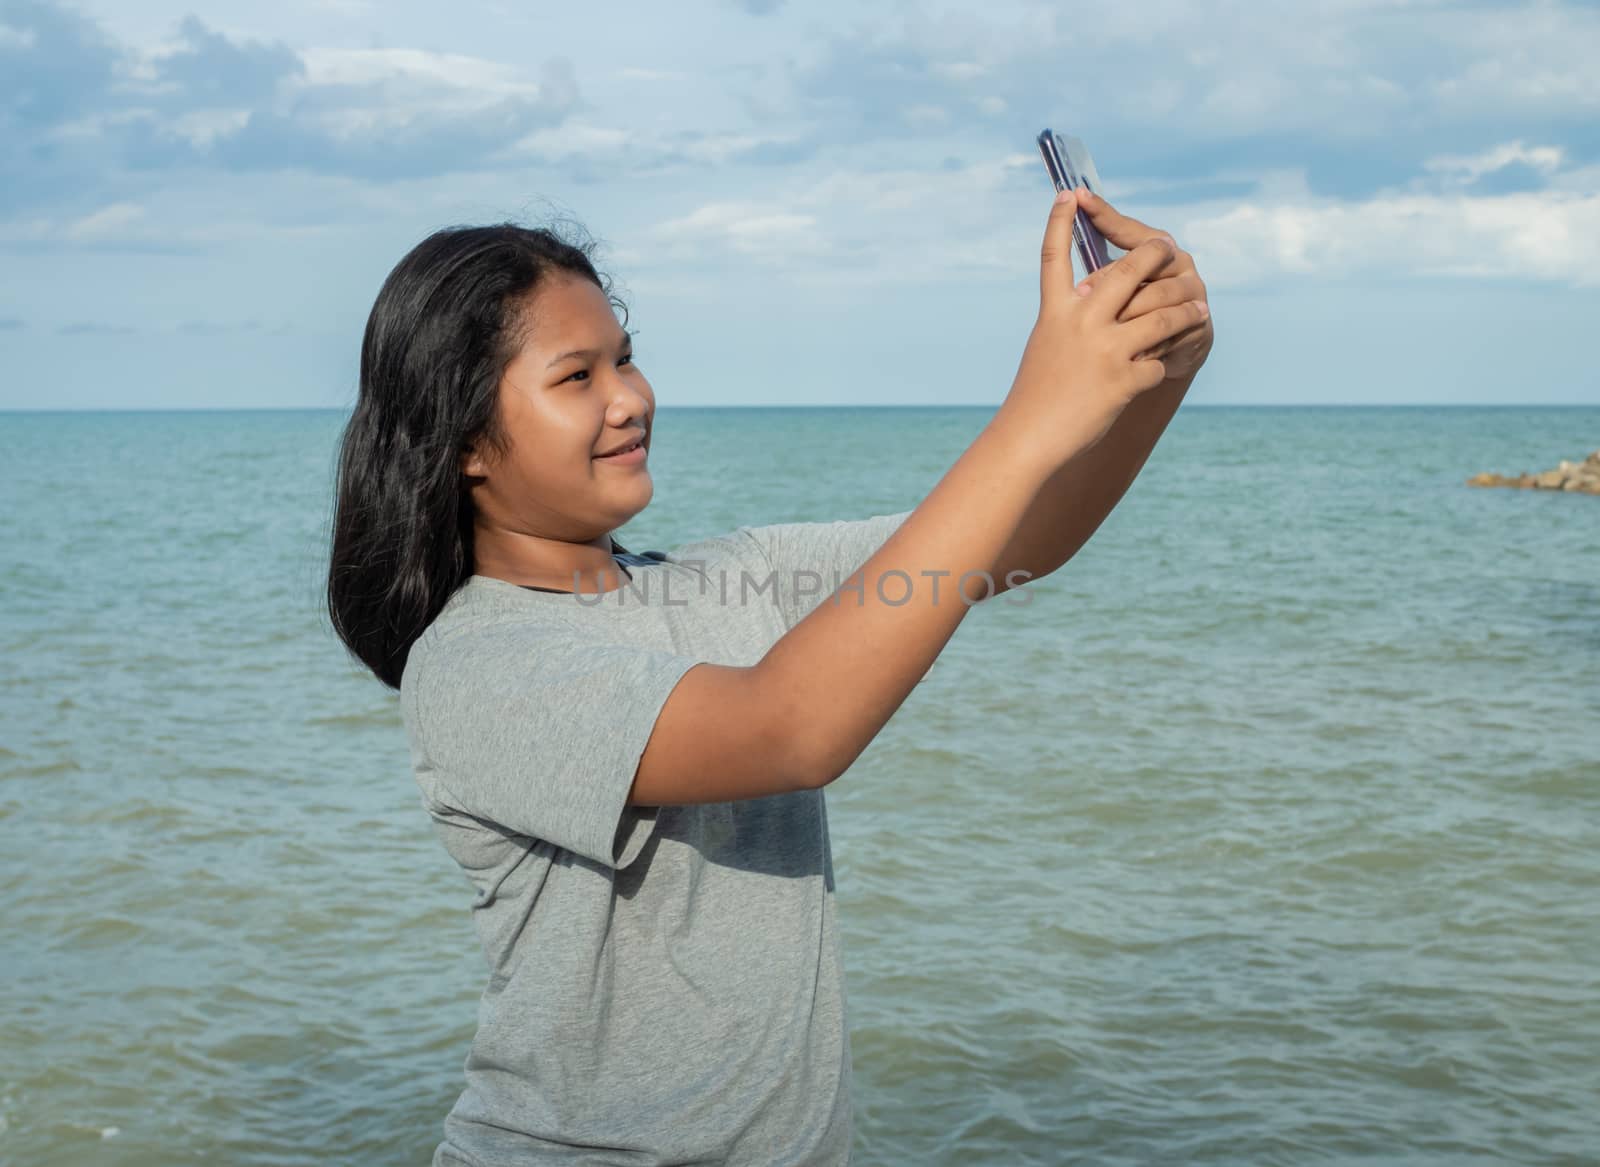 A girl using a phone to take a selfie on a sea background